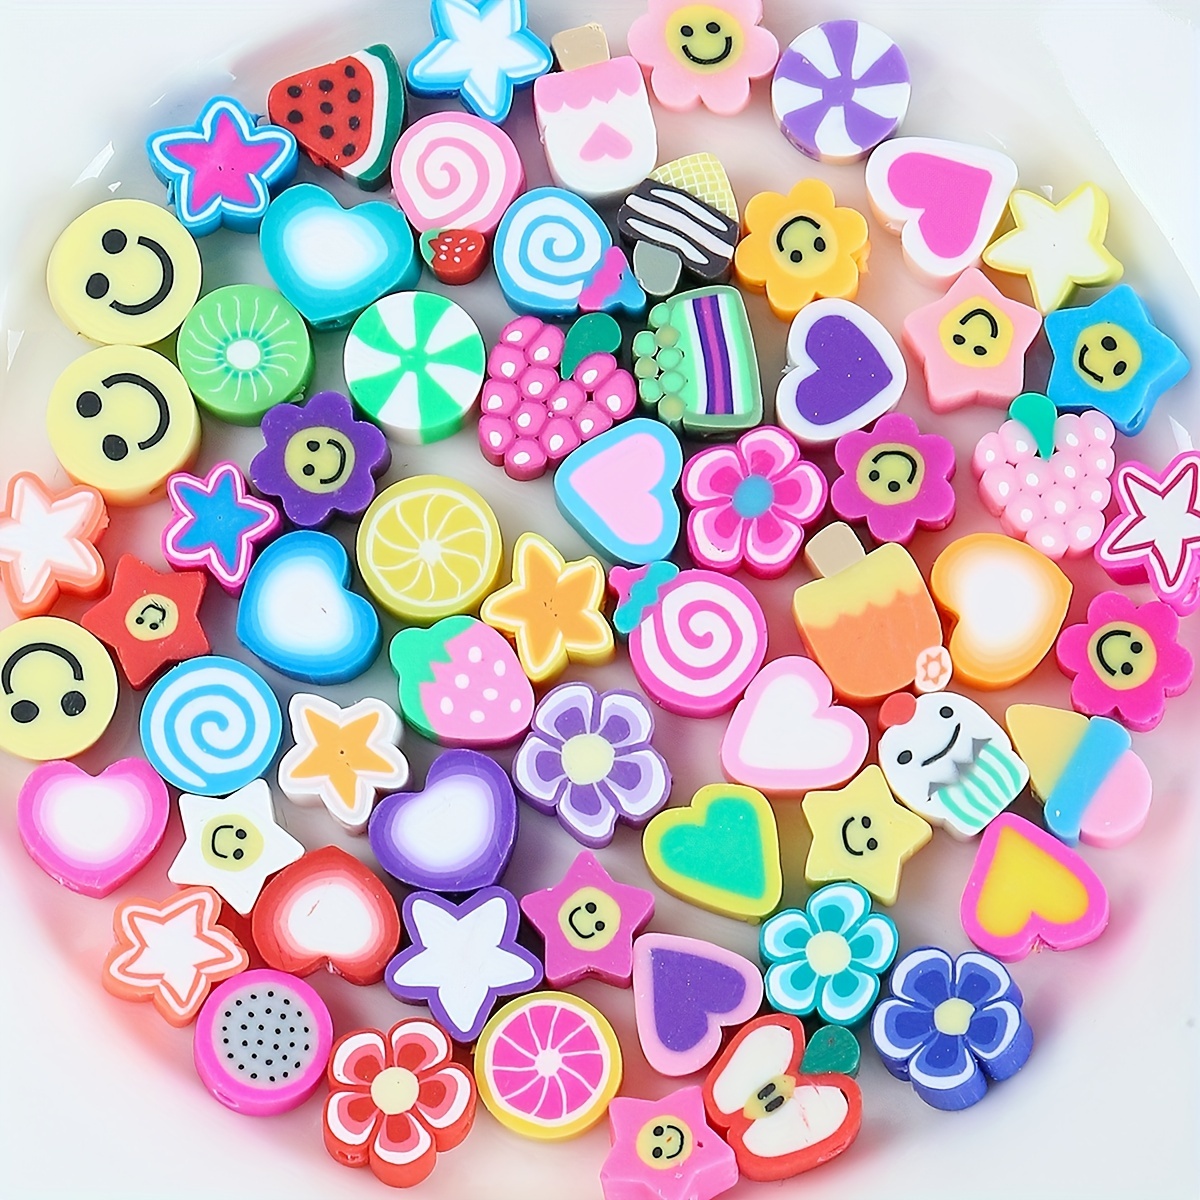 45styles 40-50PCS/Box Polymer Clay Bead Animal Smiling Face Flower Fruit  Beads For Jewelry Making DIY Bracelet Earring Necklace